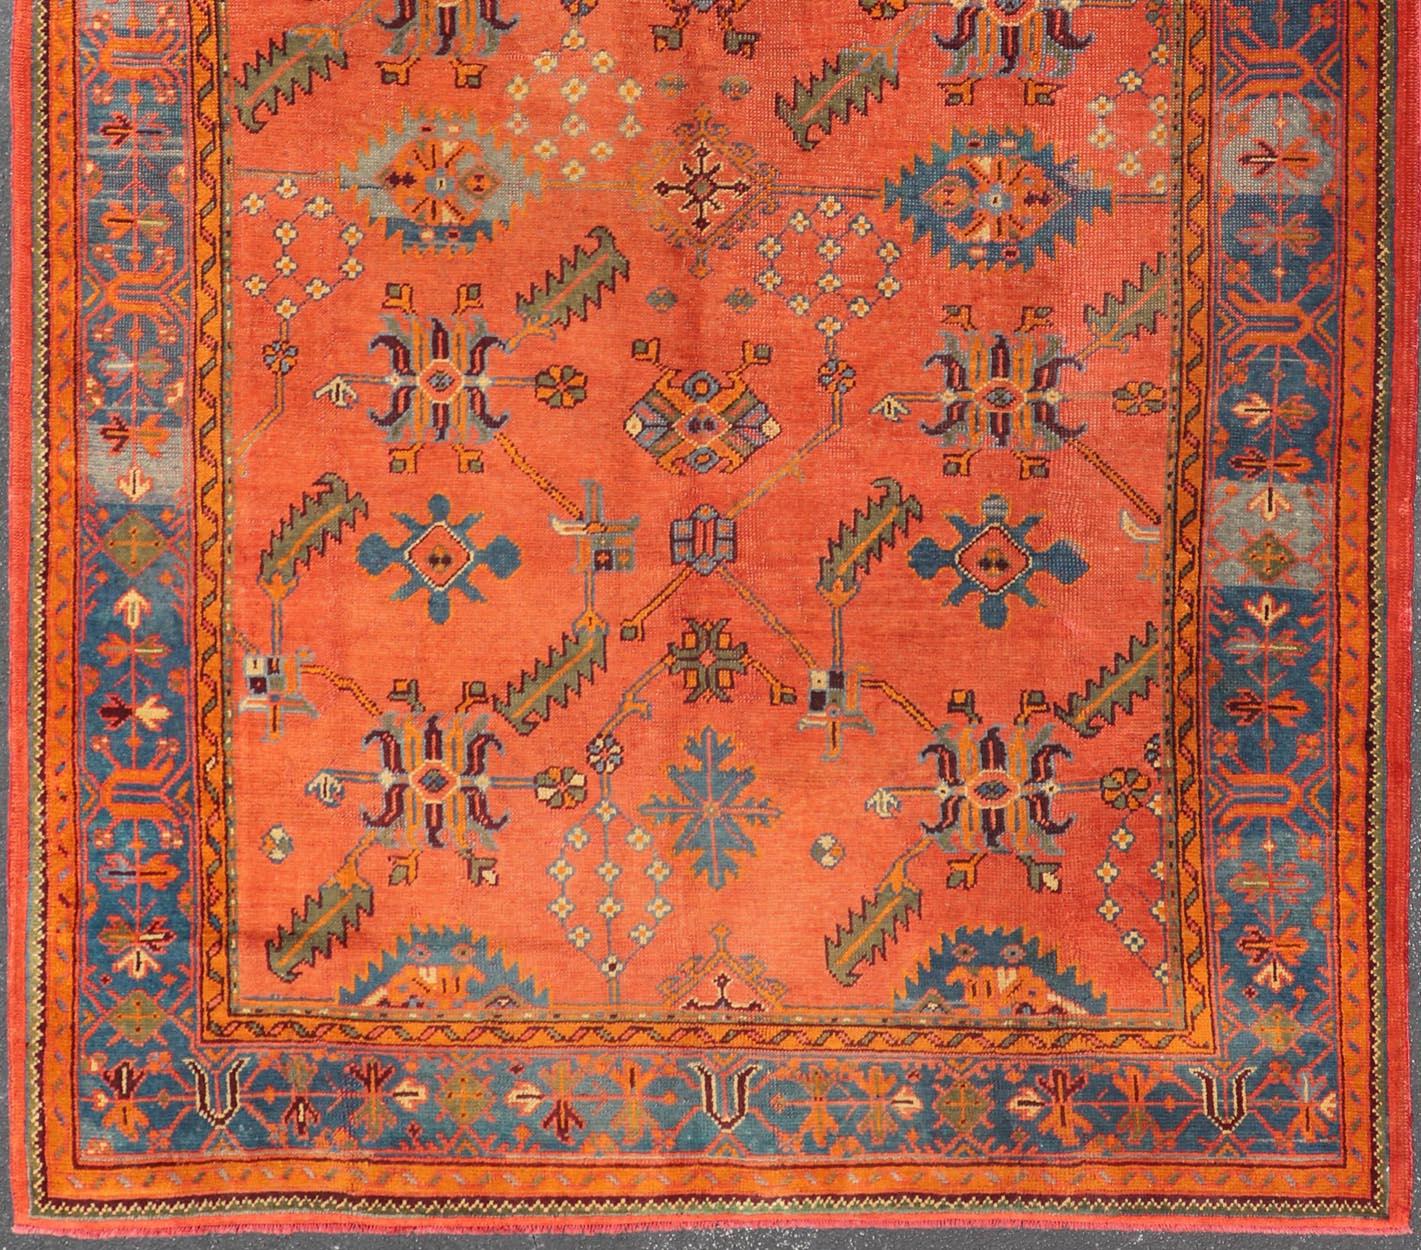 Antique Turkish Oushak Colorful Rug With All-Over Design In Salmon and Blue's  For Sale 6